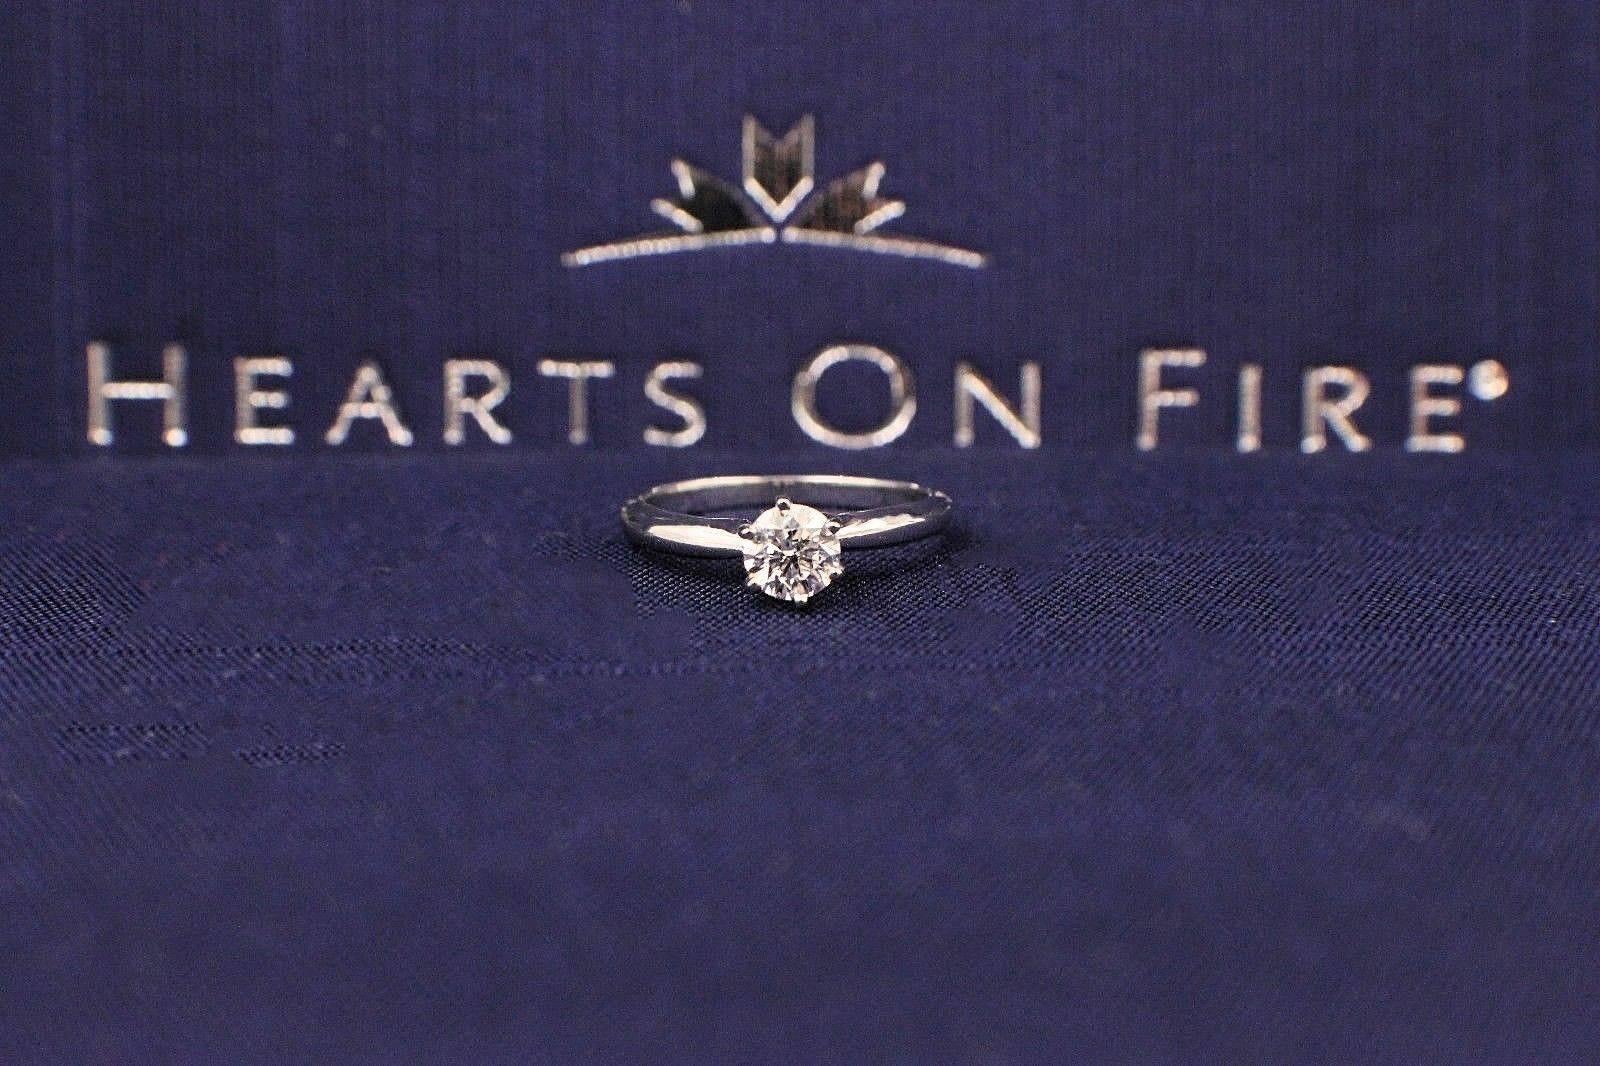 Brand:  HEARTS OF FIRE
Style:  Solitaire Engagement Ring
Serial Number:  0002357803
Metal: White Gold 14KT
Size:  3.75 - sizable
Total Carat Weight:  0.37 CTS
Diamond Shape:  Round Brilliant Ideal Cut 
Diamond Color & Clarity:  G / SI1
Inscription: 